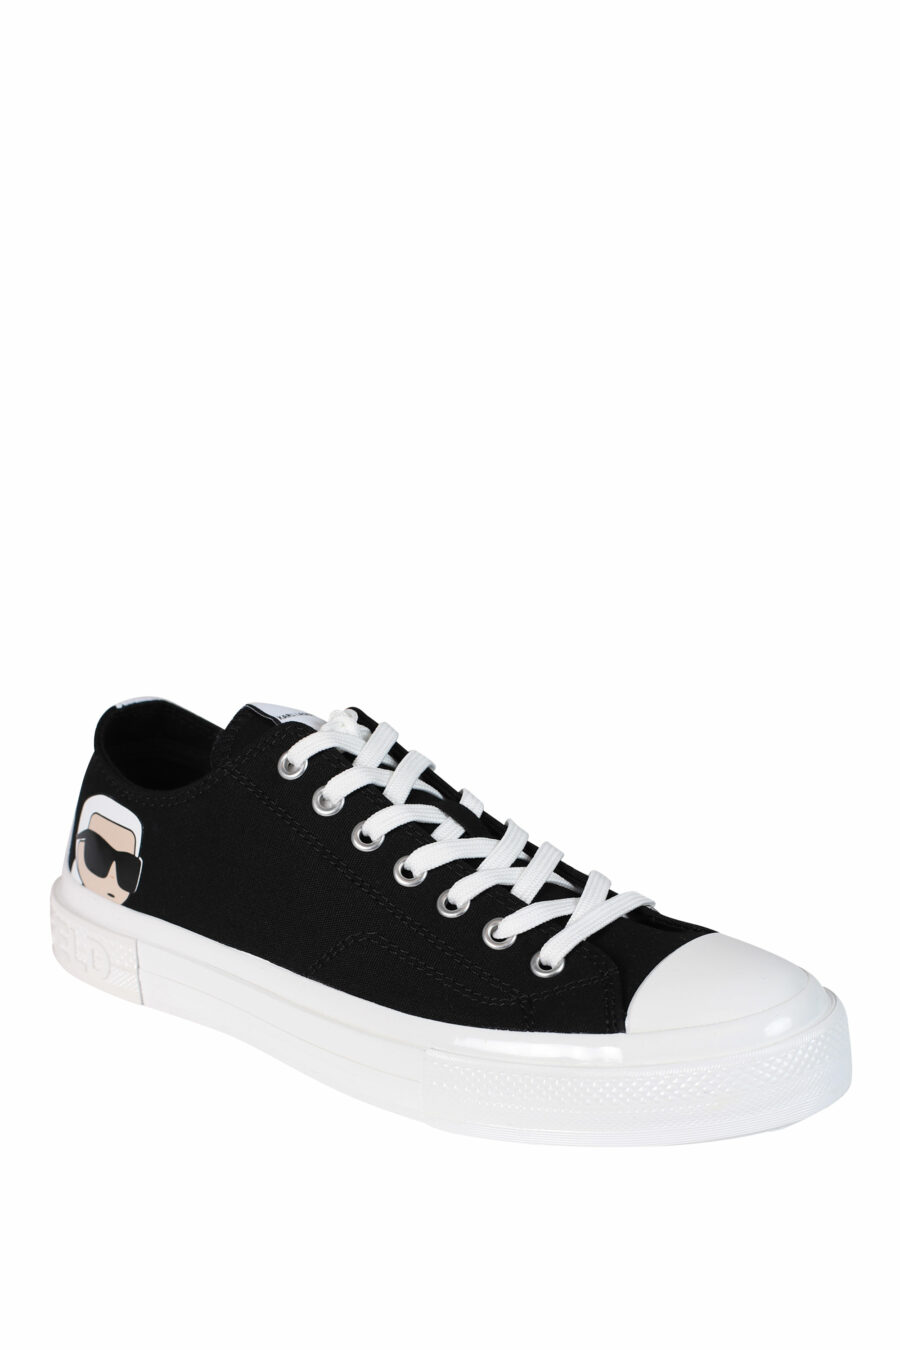 Black trainers with "karl" logo and white sole - 5059529249655 2